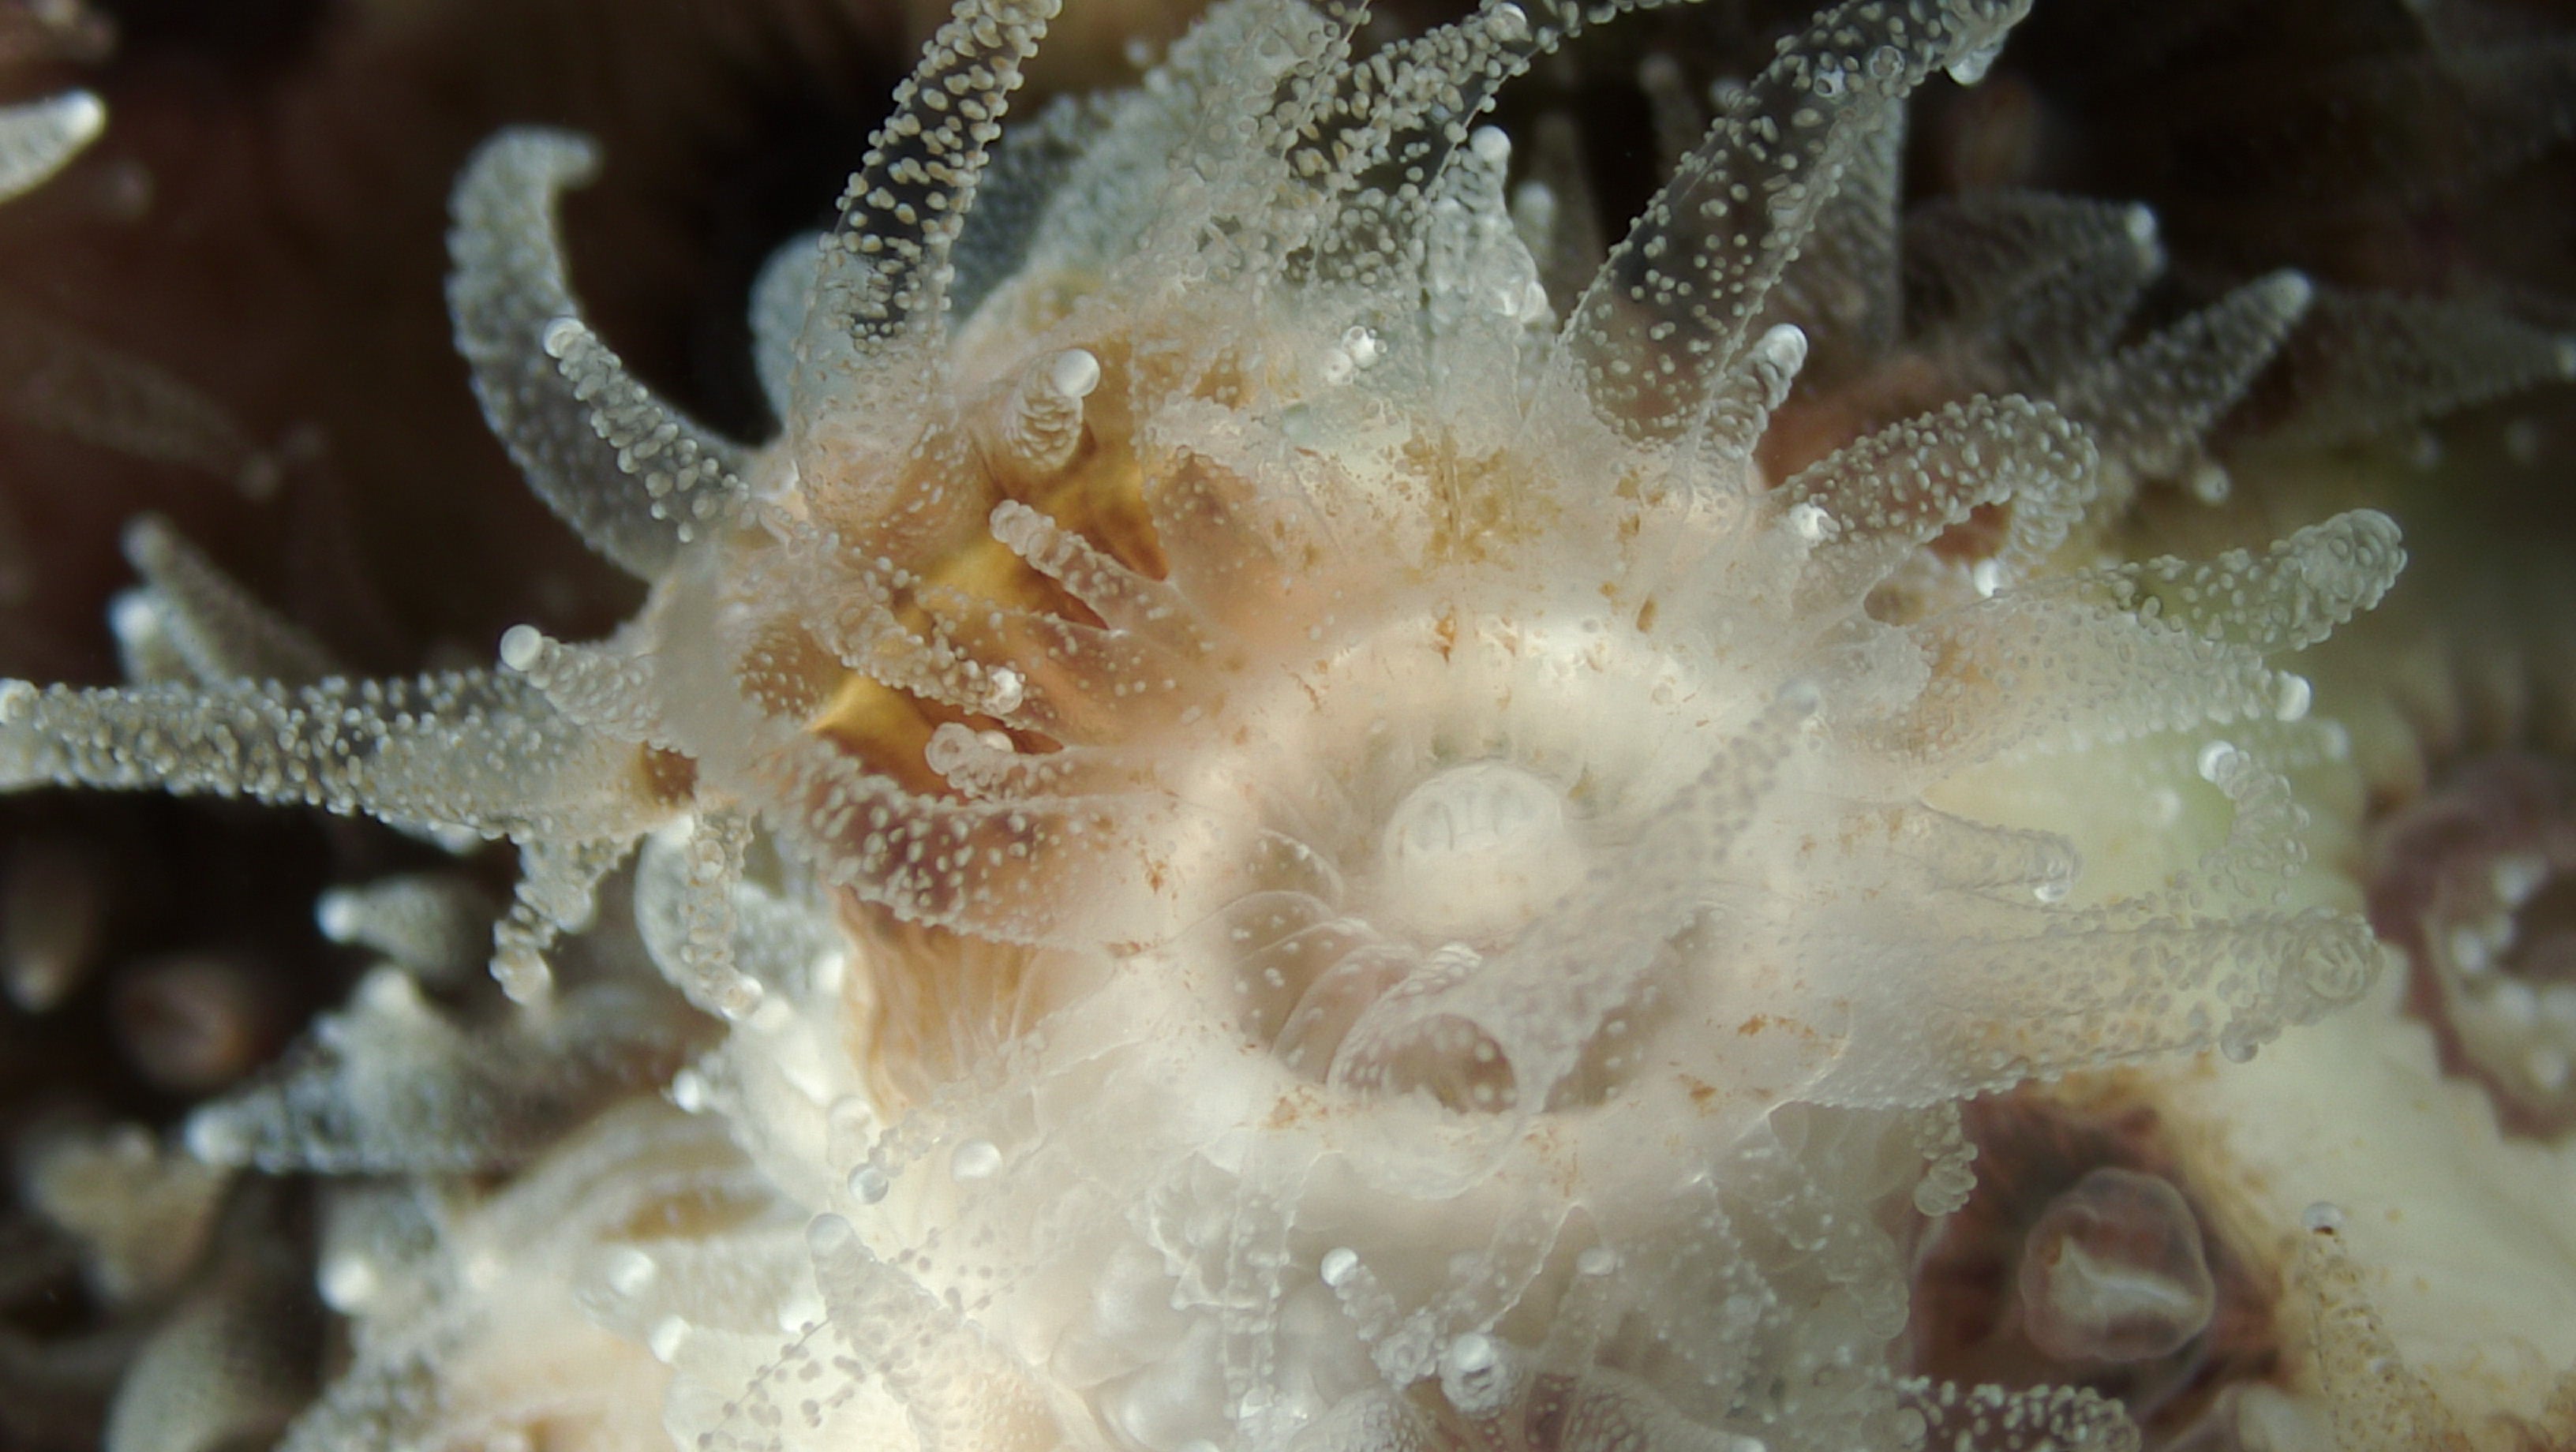 Microscopic coral A. poculata, white with tentacles extended